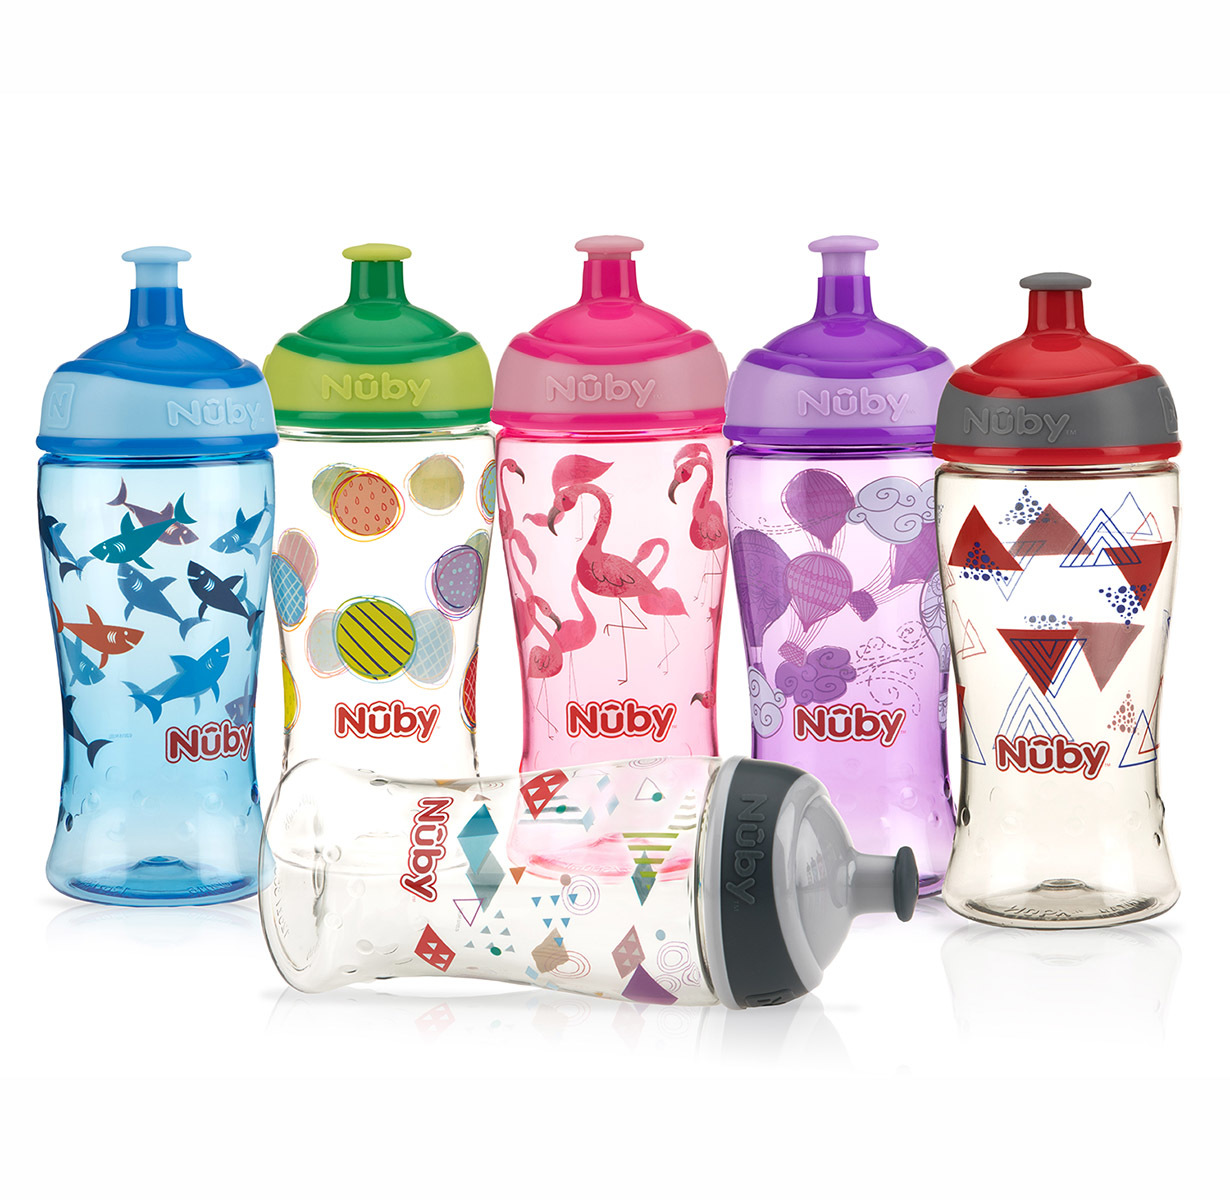 Wholesale Sippy Cups - 12 oz, Bright Prints, Durable